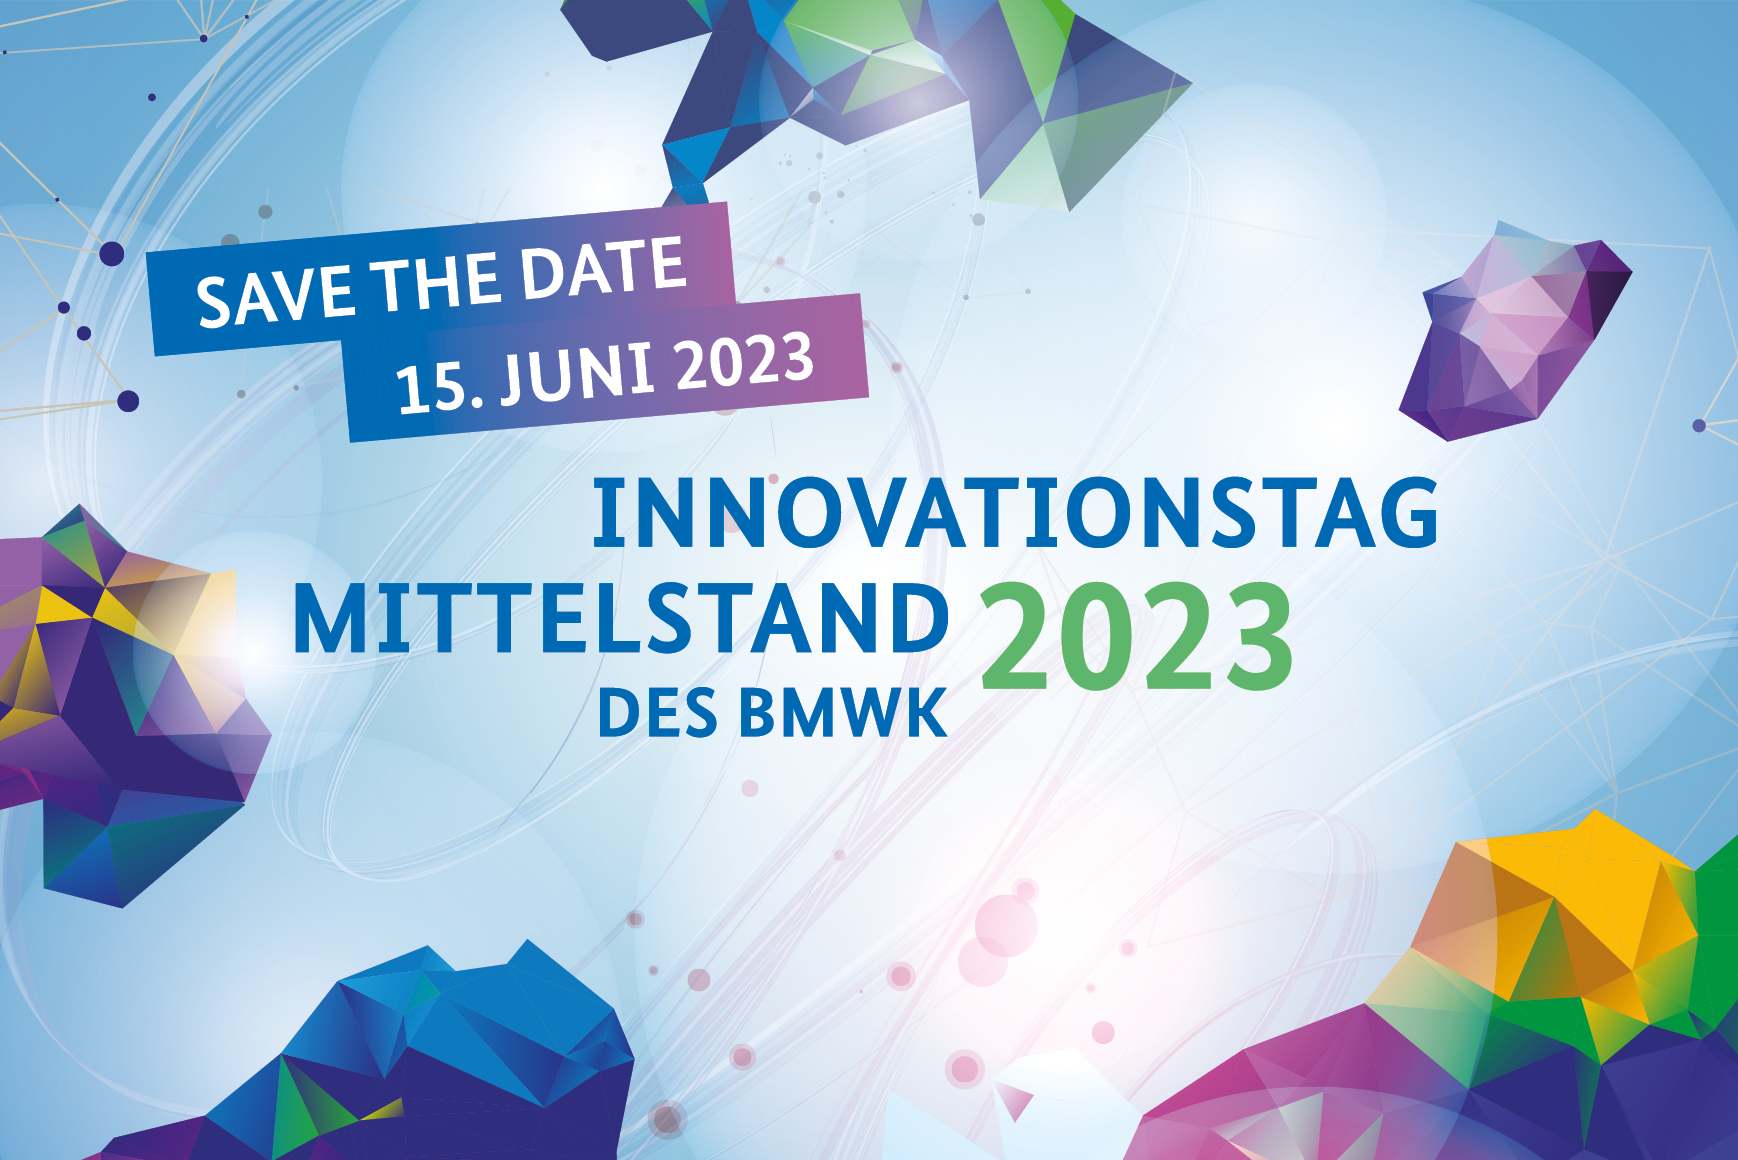 Innovationstag Mittelstand - Save the Date